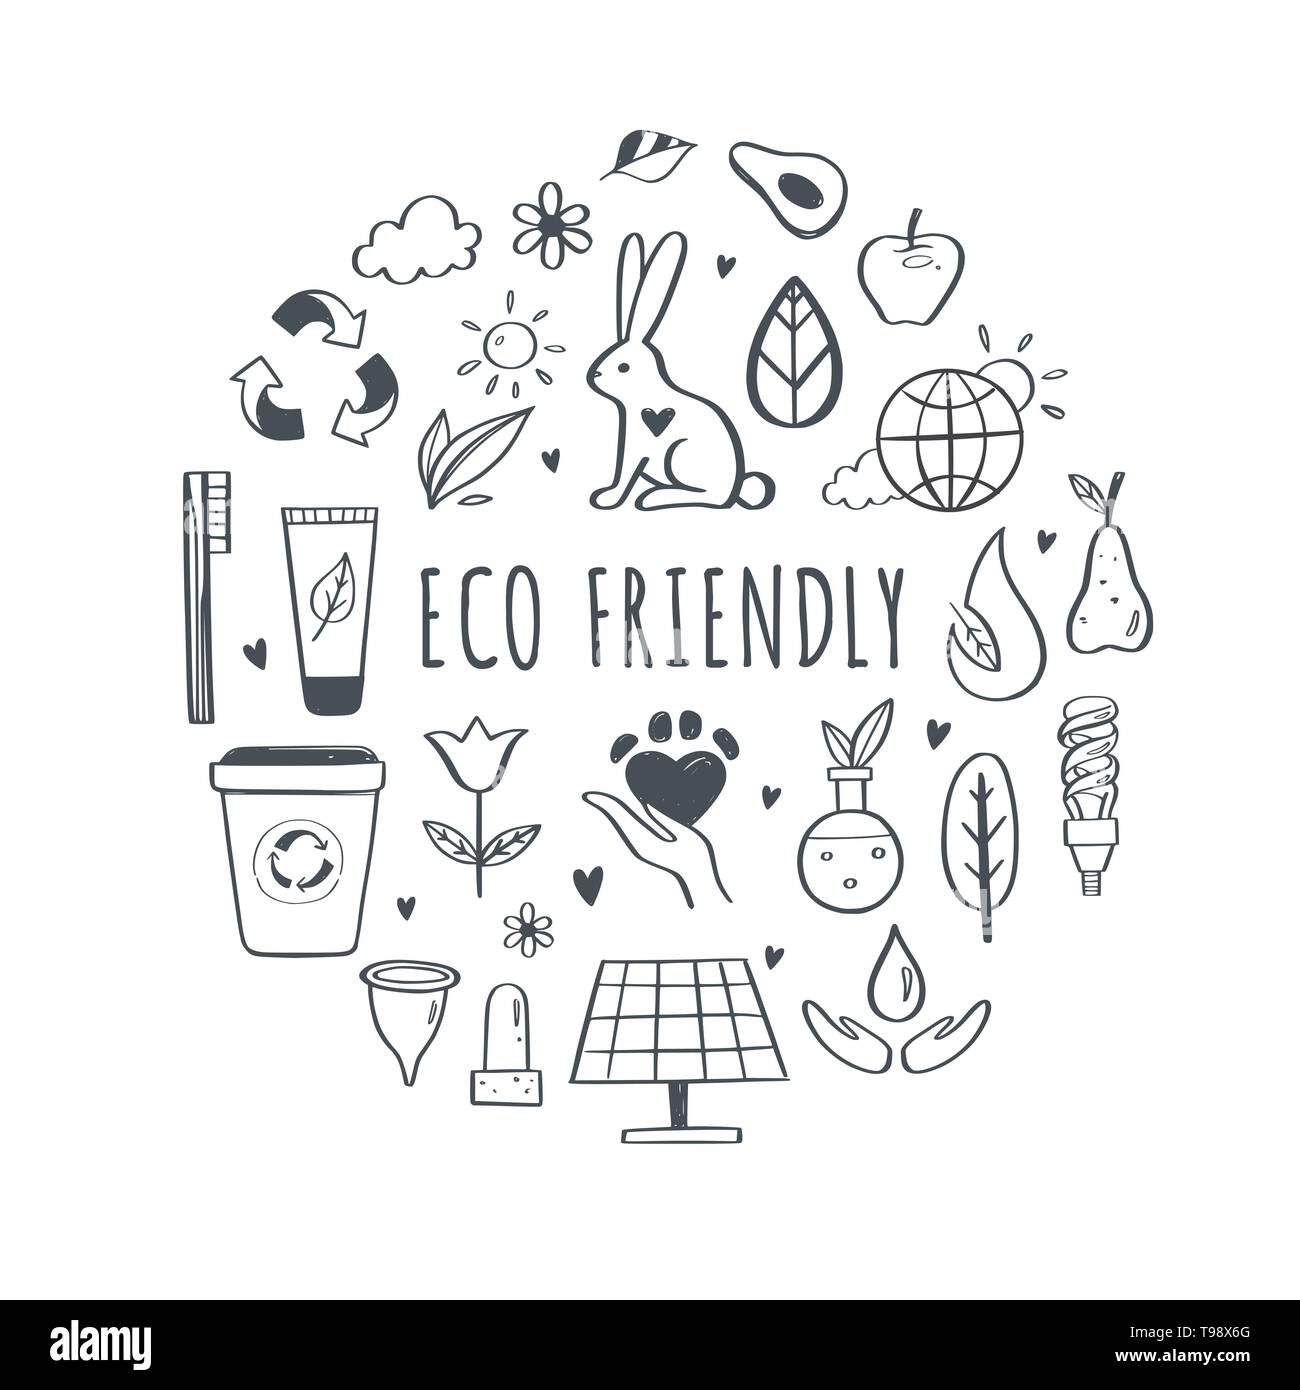 Eco friendly, ecology vector hand drawn icons set. Organic cosmetics, zero waste, save earth and healthy lifestyle sign Stock Vector